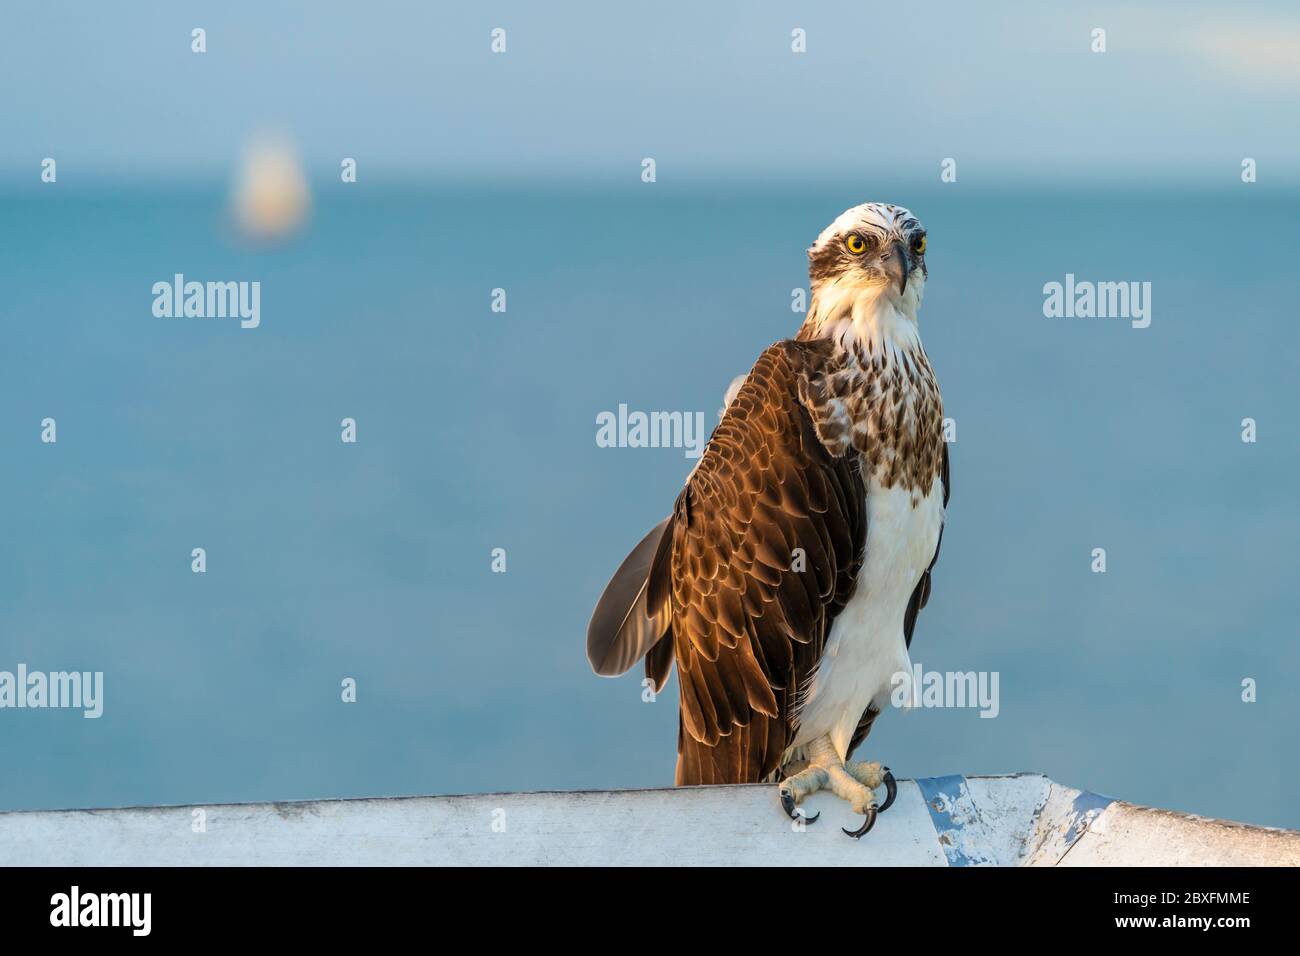 Osprey (pandion haliaetus) sitting on handrail with ocean in background Stock Photo